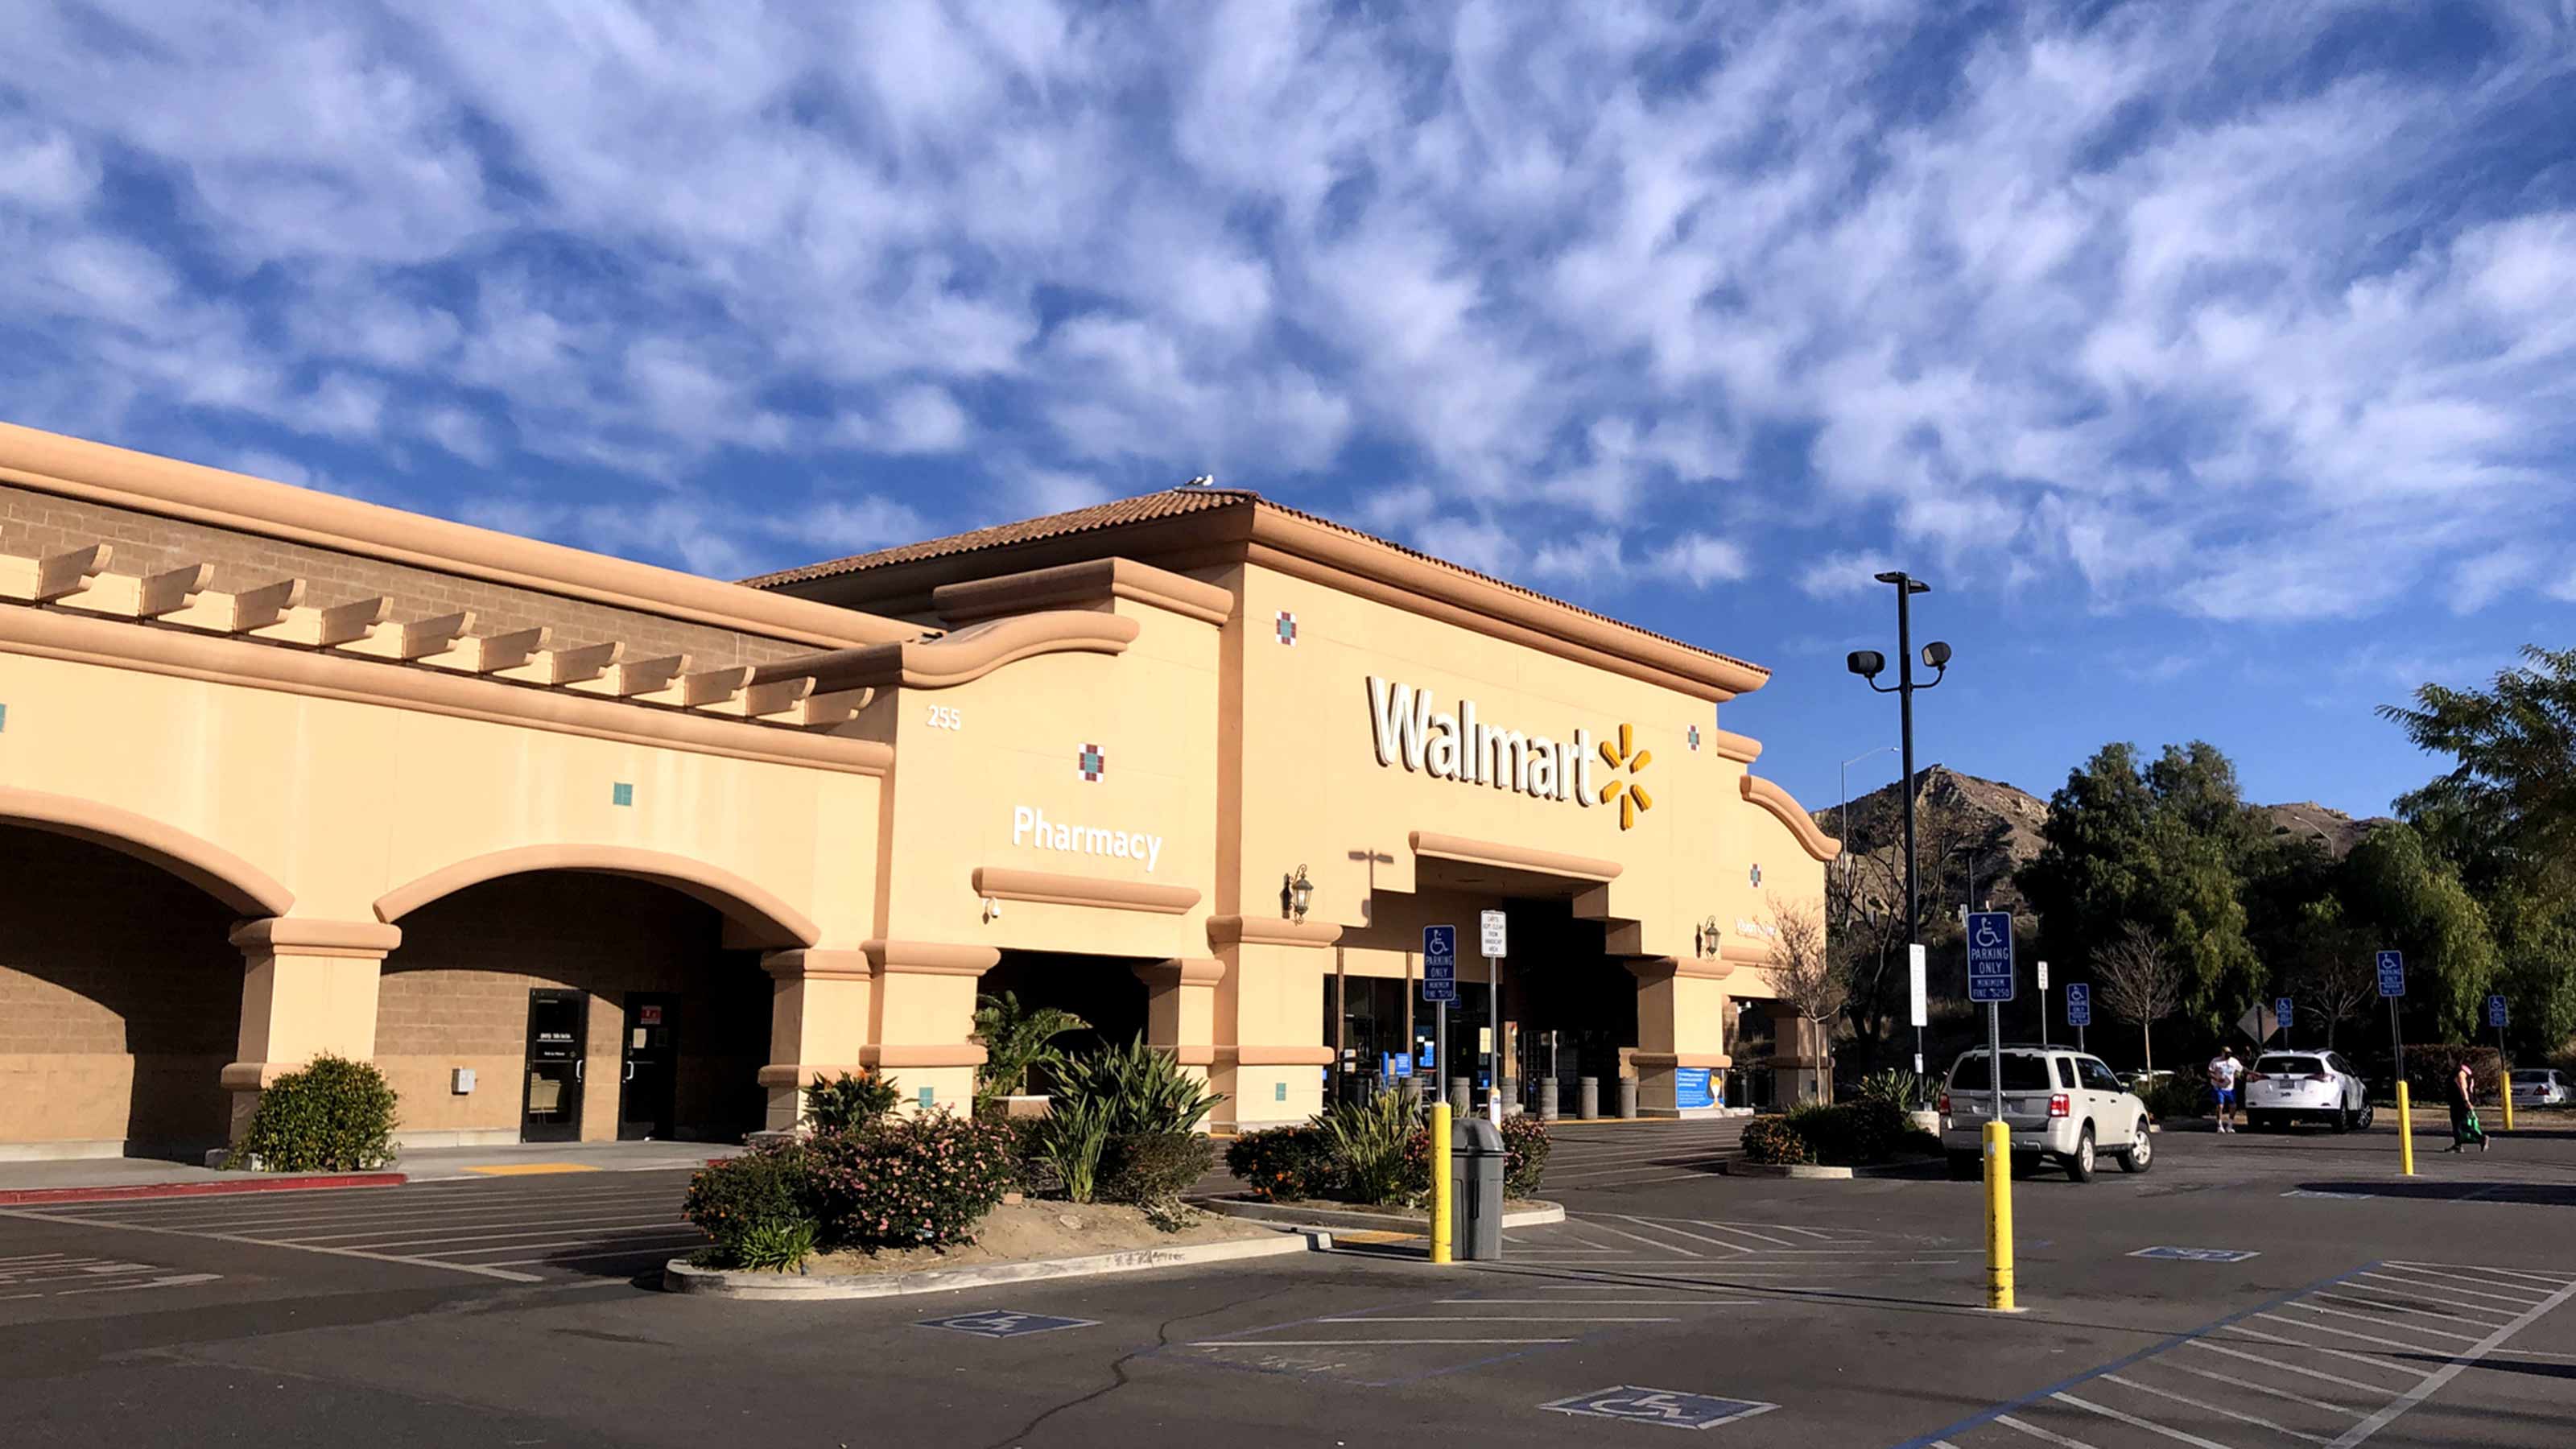 Here Are The 10 States That Spend The Most At Walmart